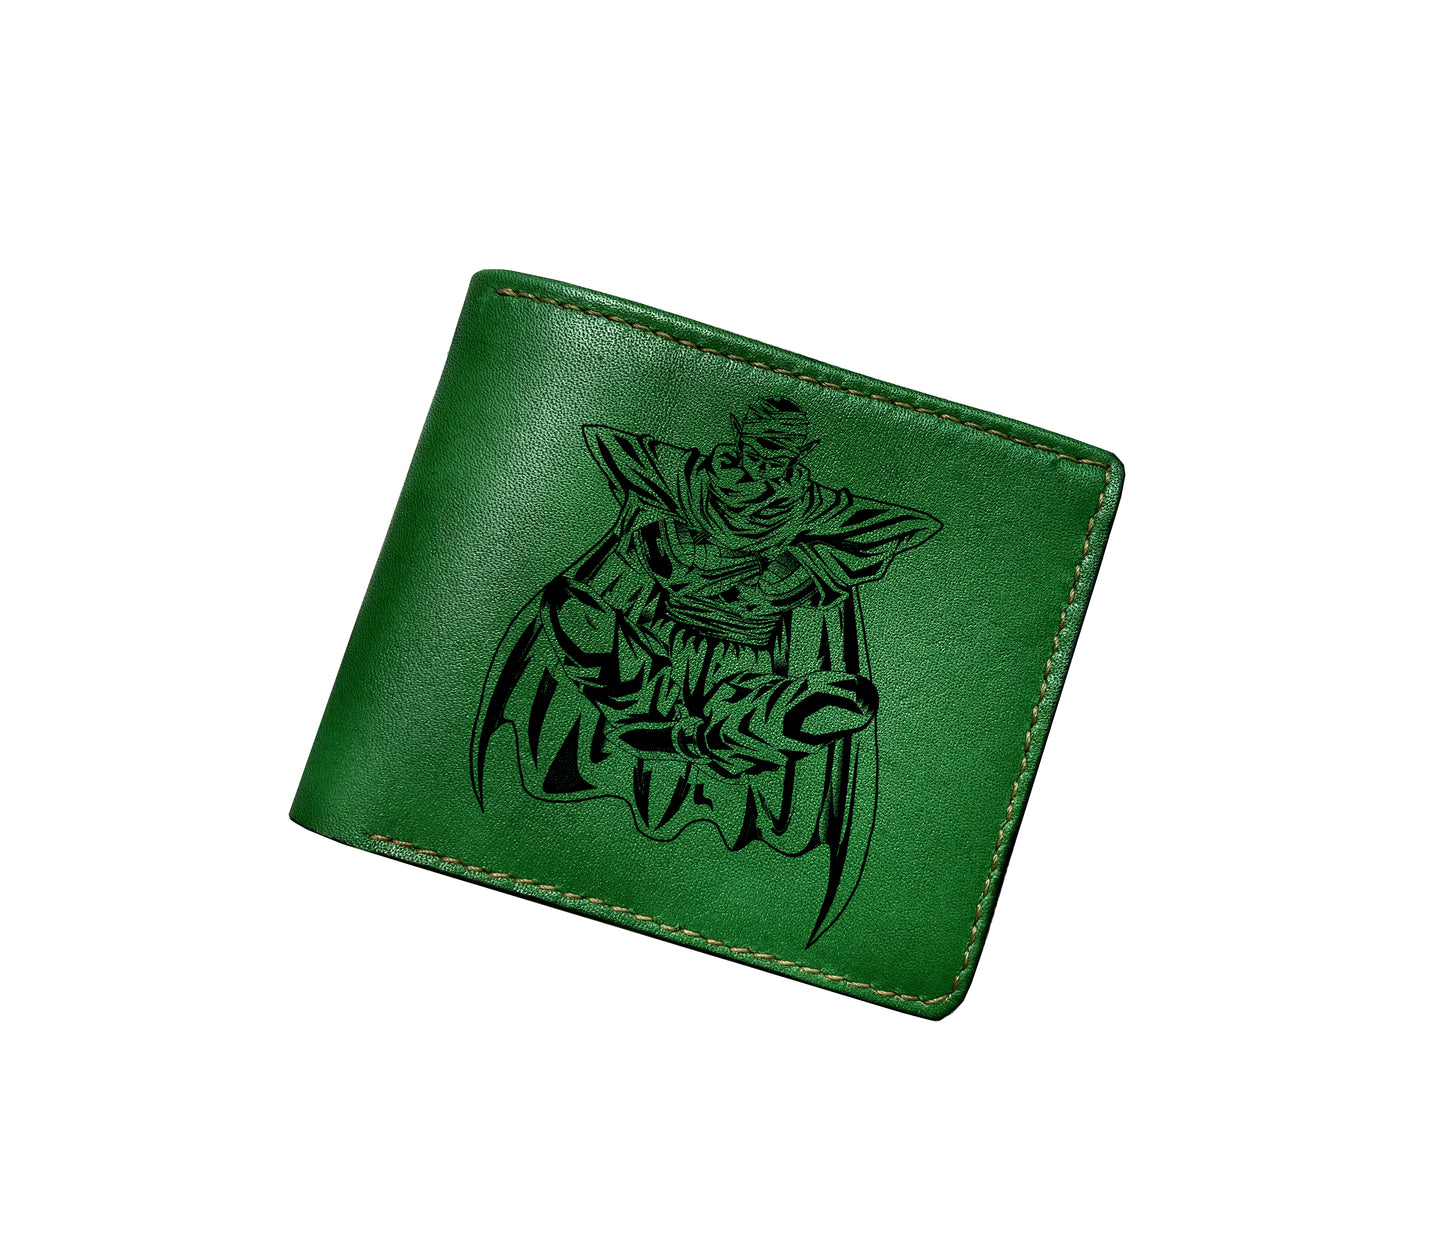 Mayan Corner - Dragon ball characters drawing leather wallet, fan art leather gift for men, wallet for him, leather anniversary present ideas - Beerus the God of destruction